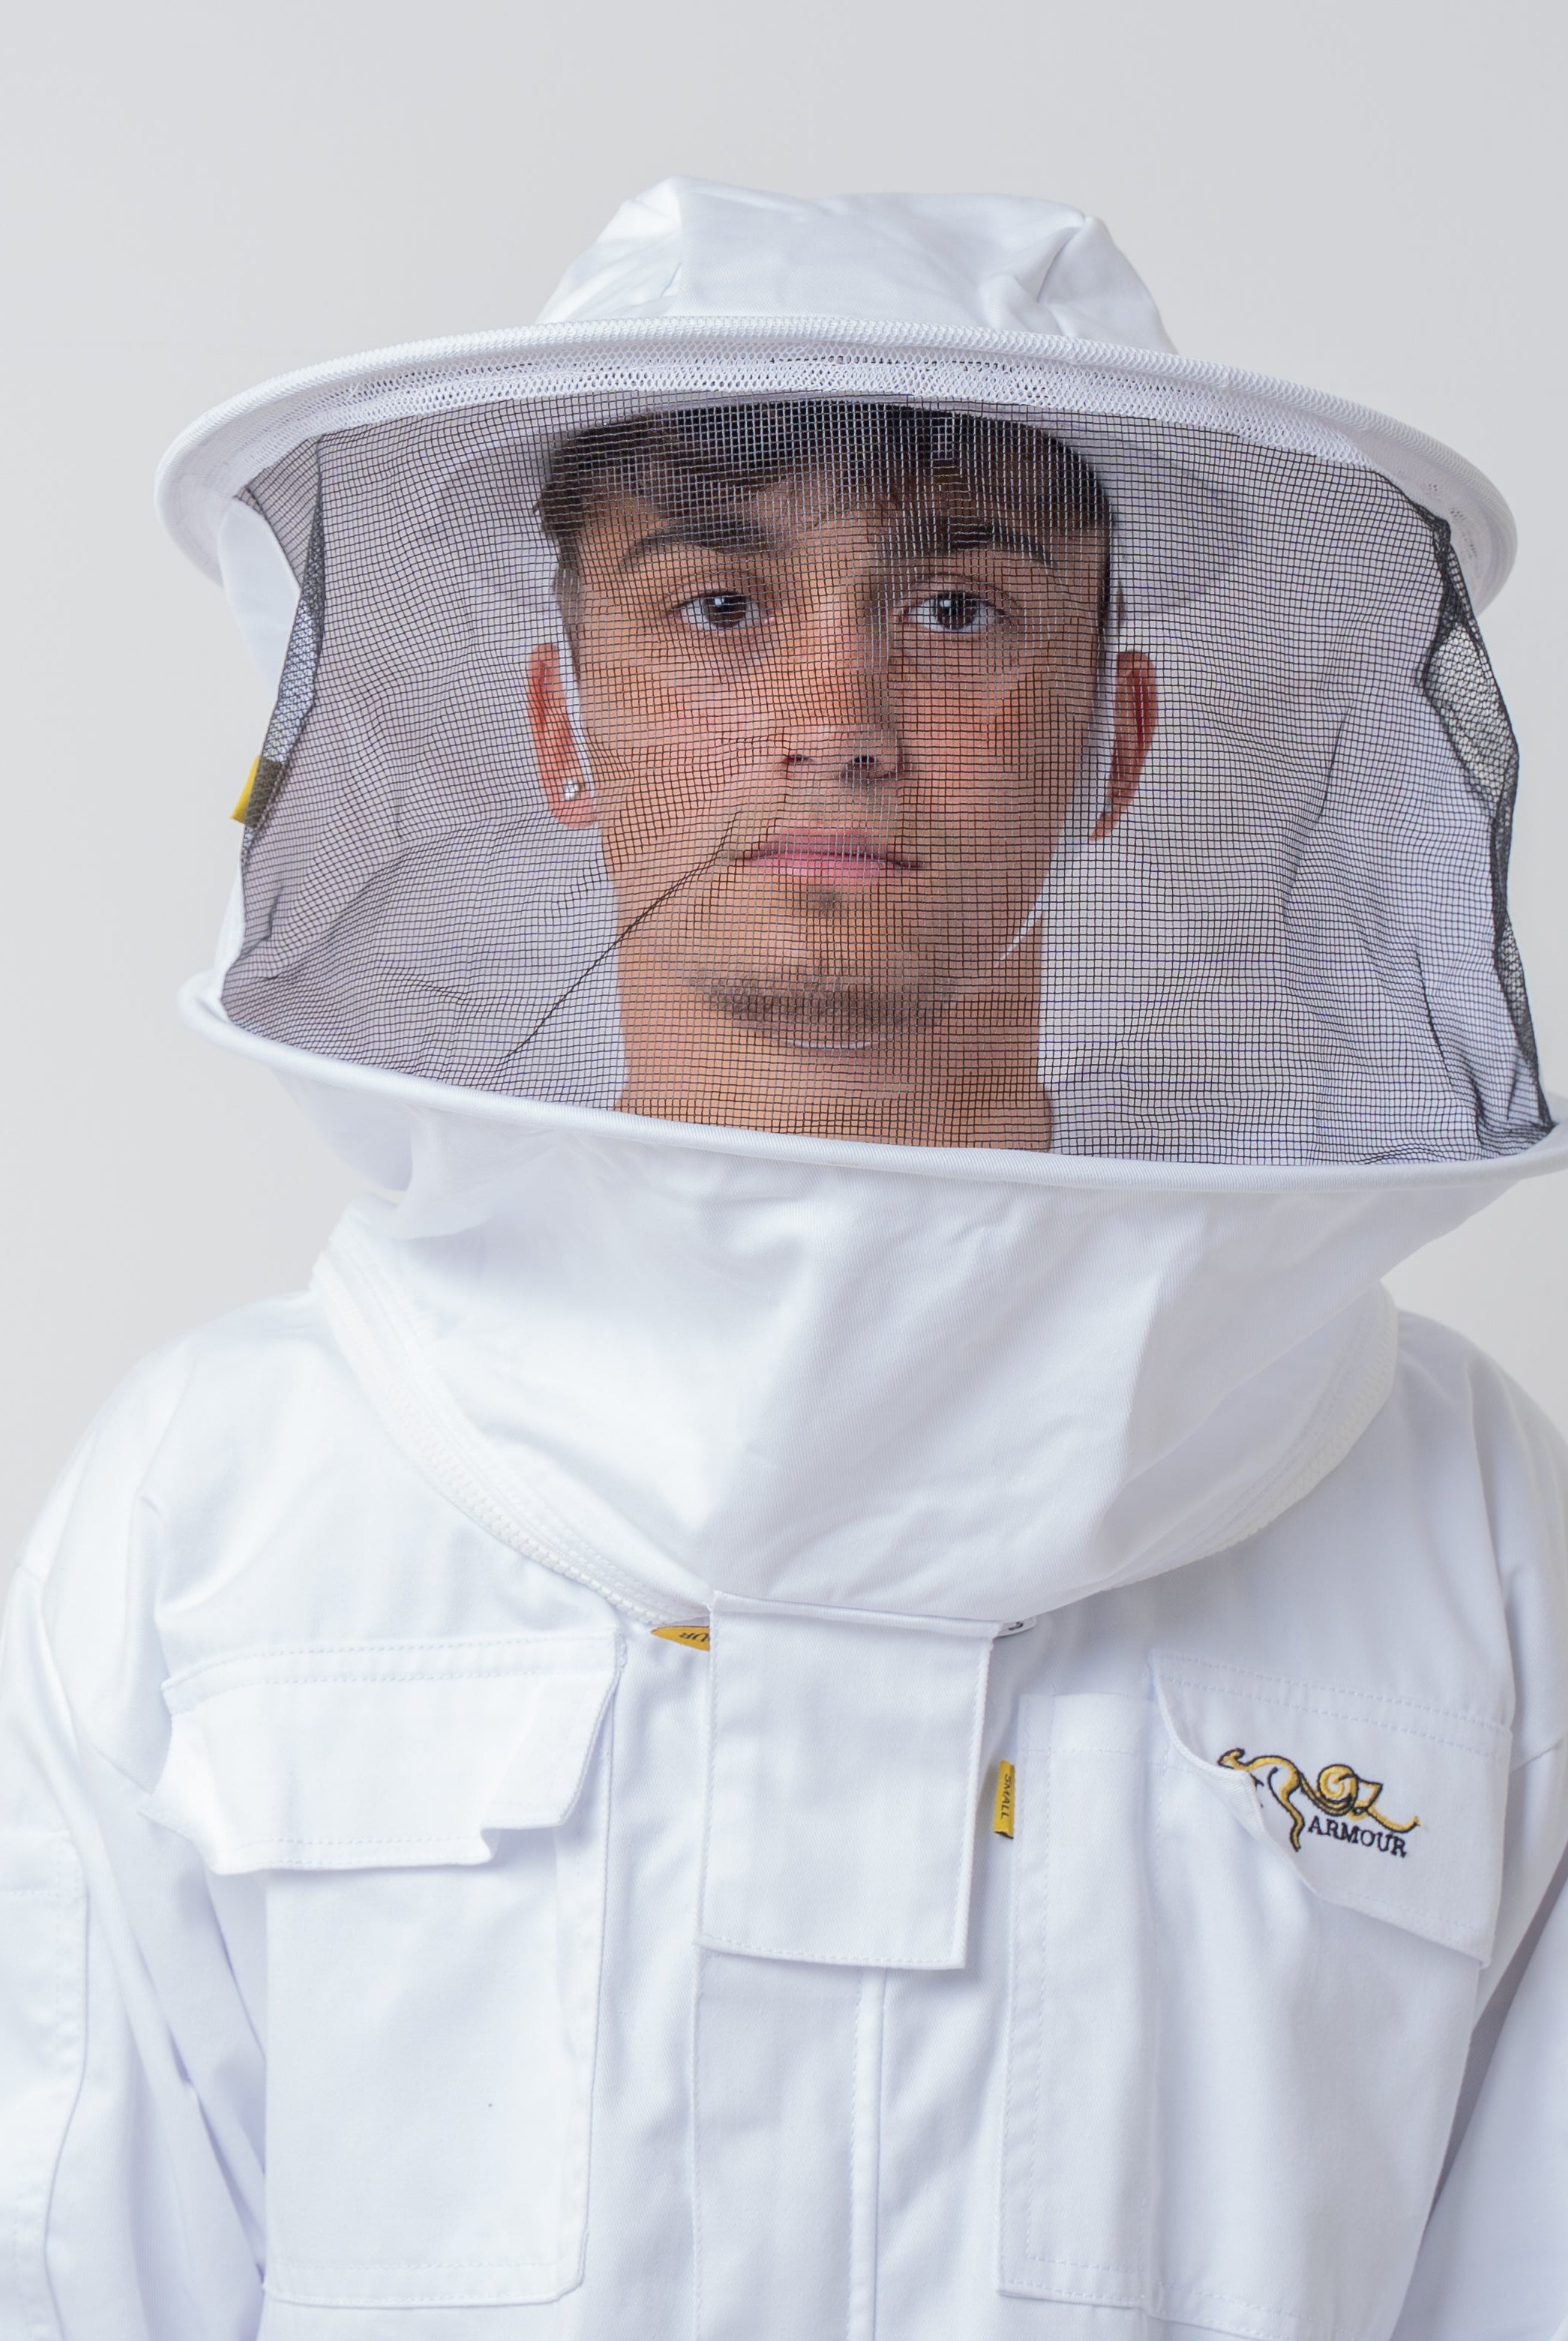 Durable Poly Cotton Beekeeping Suit with Round Hat Veil by OZ Armour - Reliable Protection for Beekeepers